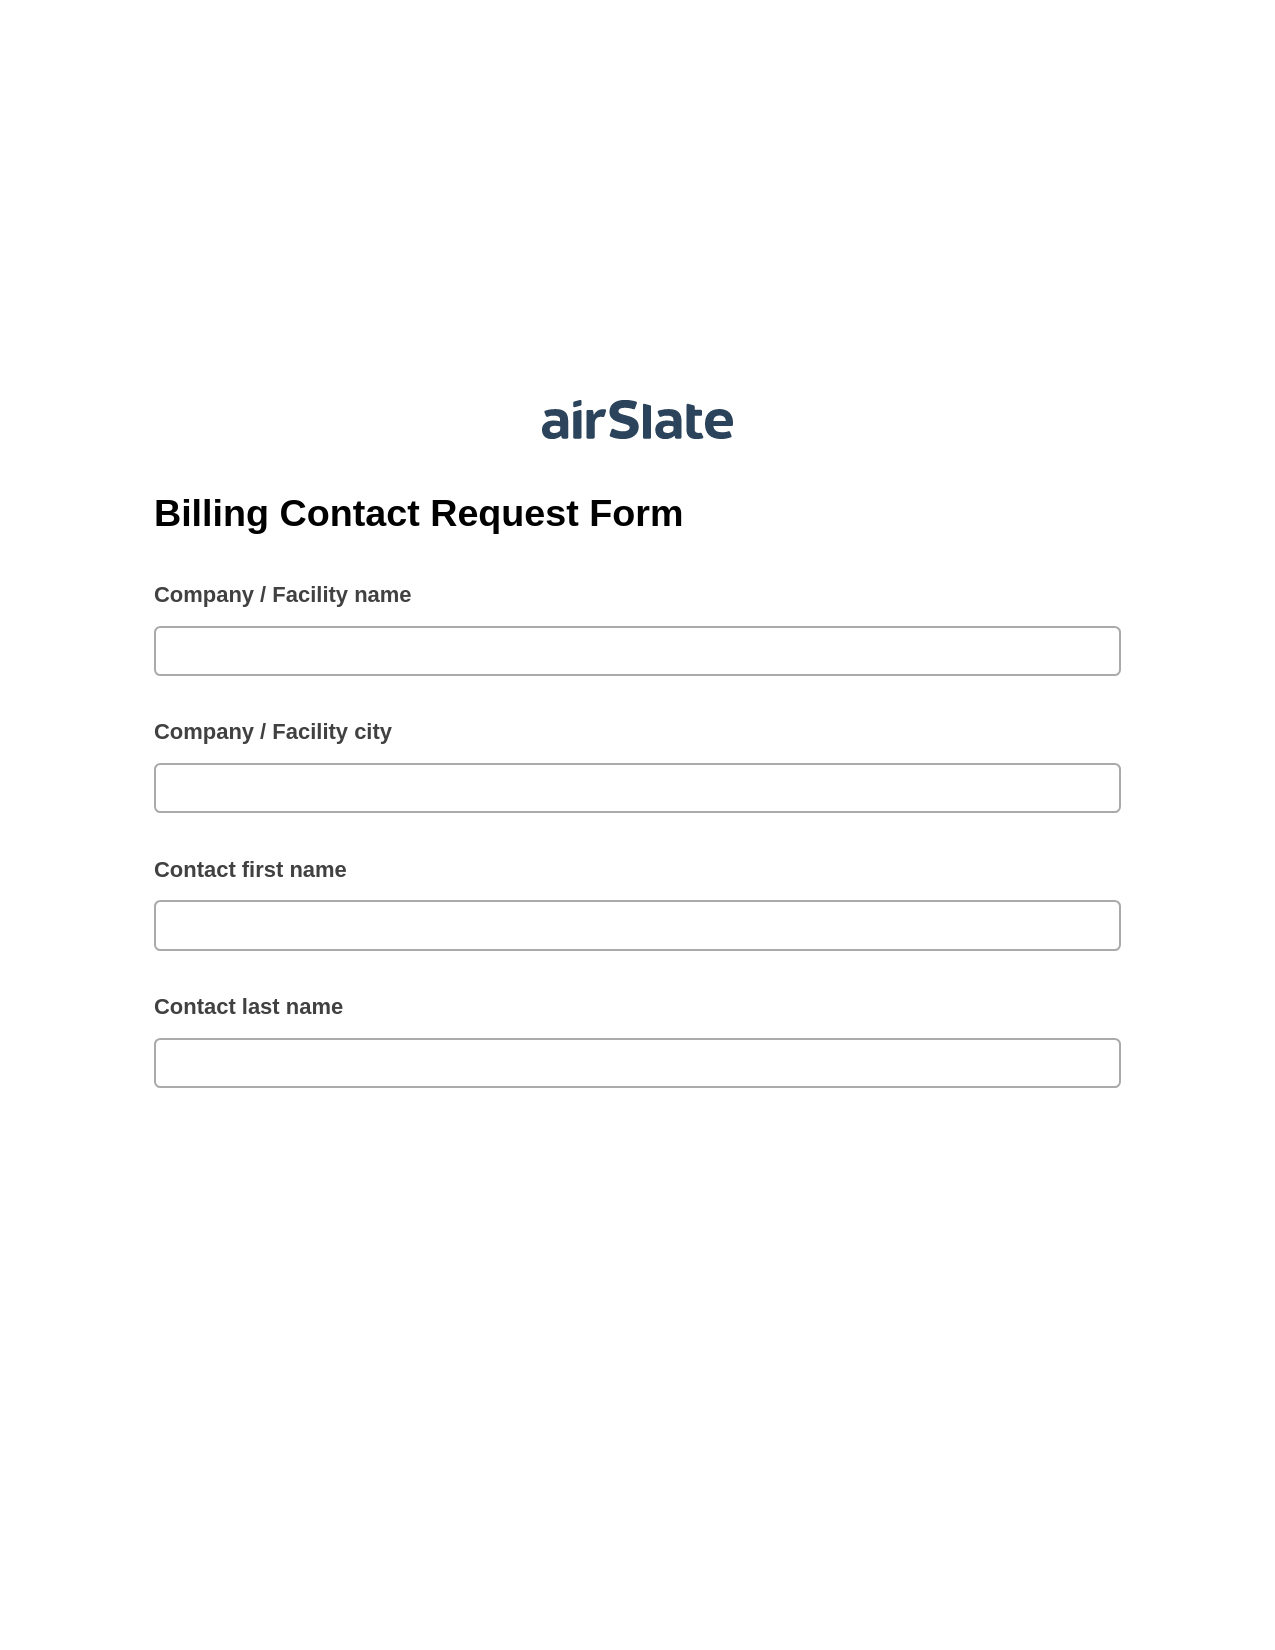 Billing Contact Request Form System Bot - Slack Two-Way Binding Bot, Create NetSuite Records Bot, Webhook Postfinish Bot